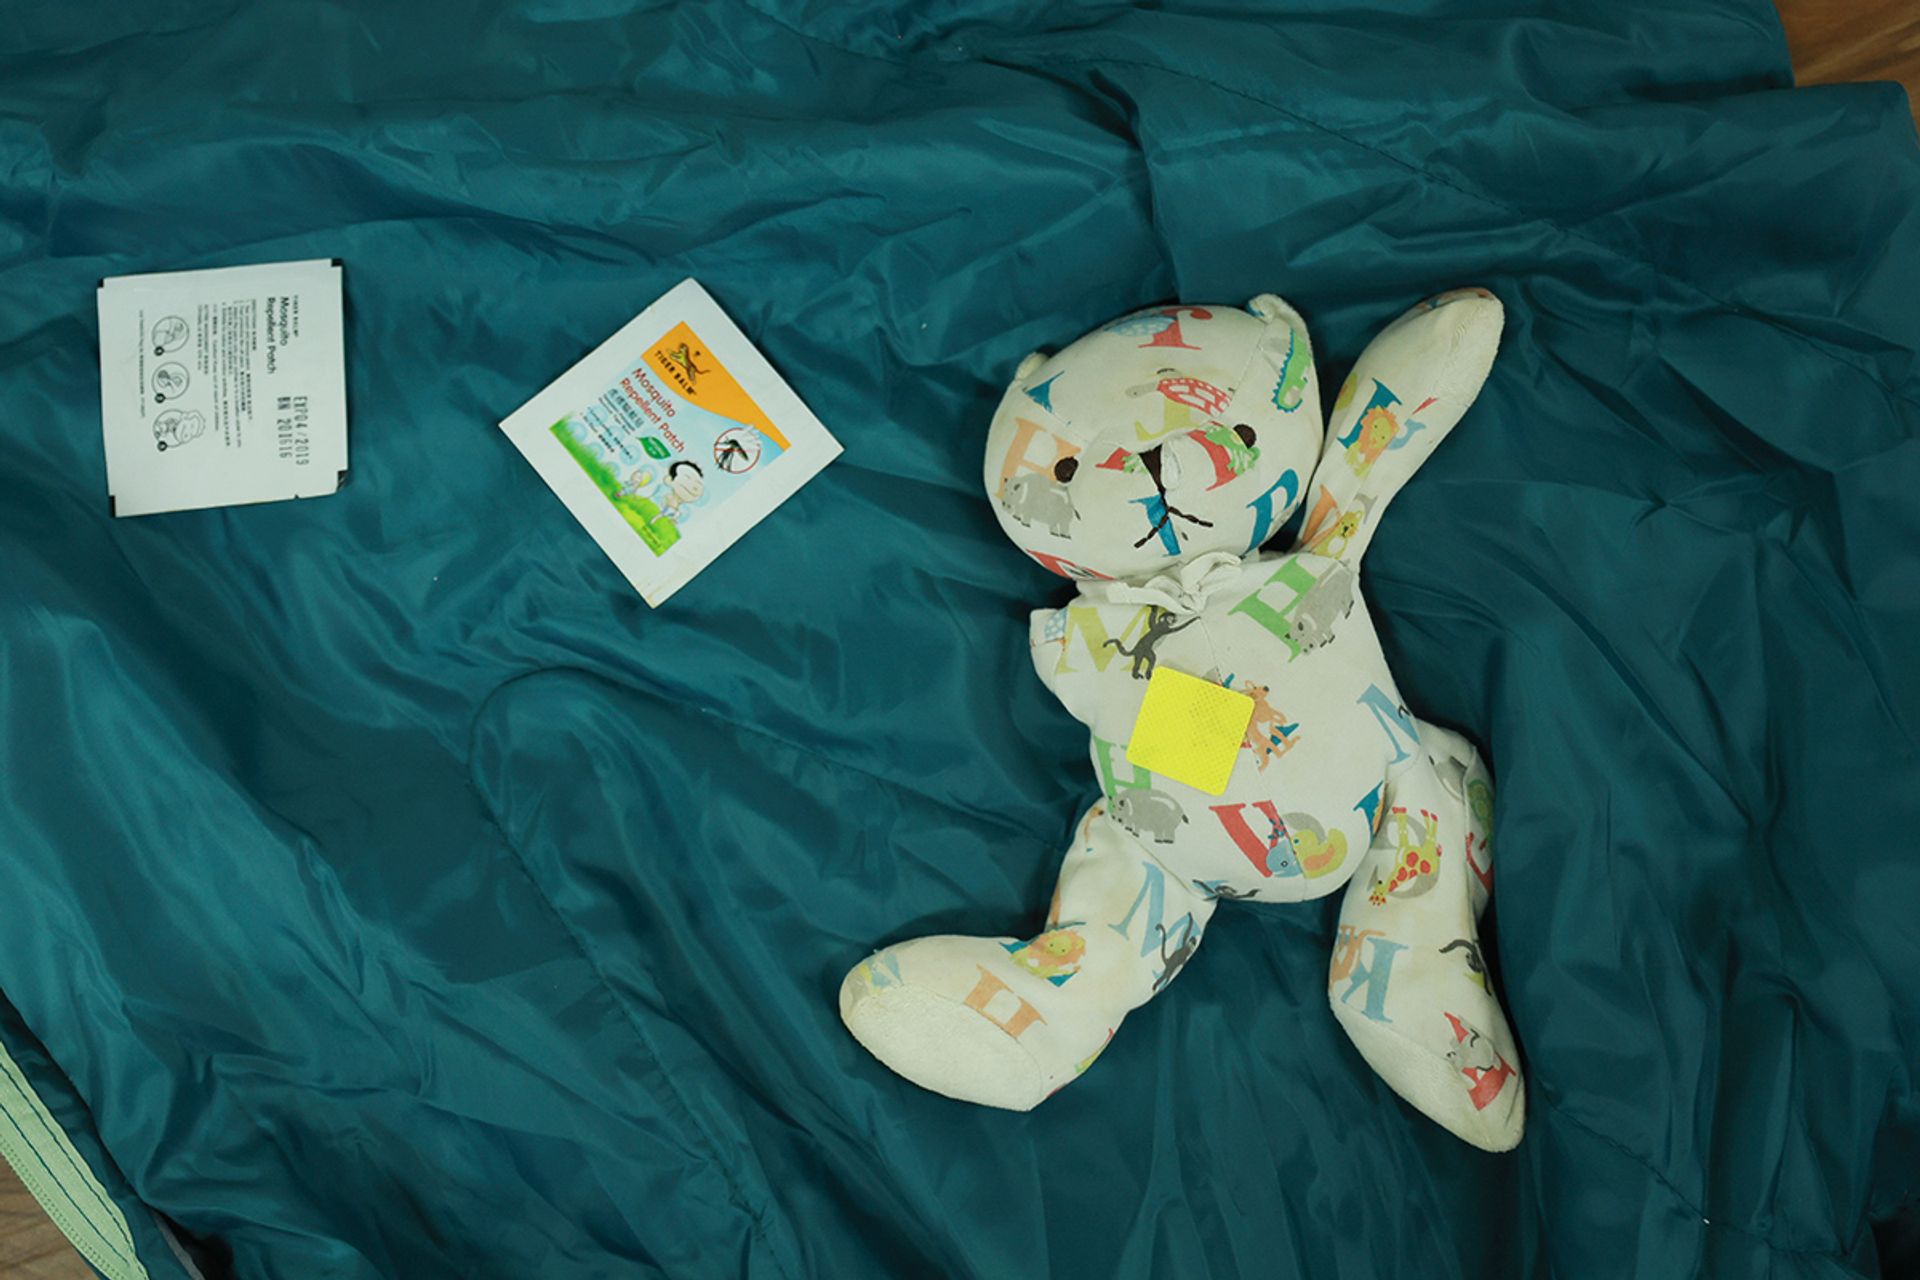 A mosquito repellent patch on a teddy bear in the lodge. Many of the children use the extra patches on their beloved soft toys to “protect” them against unwanted bites.